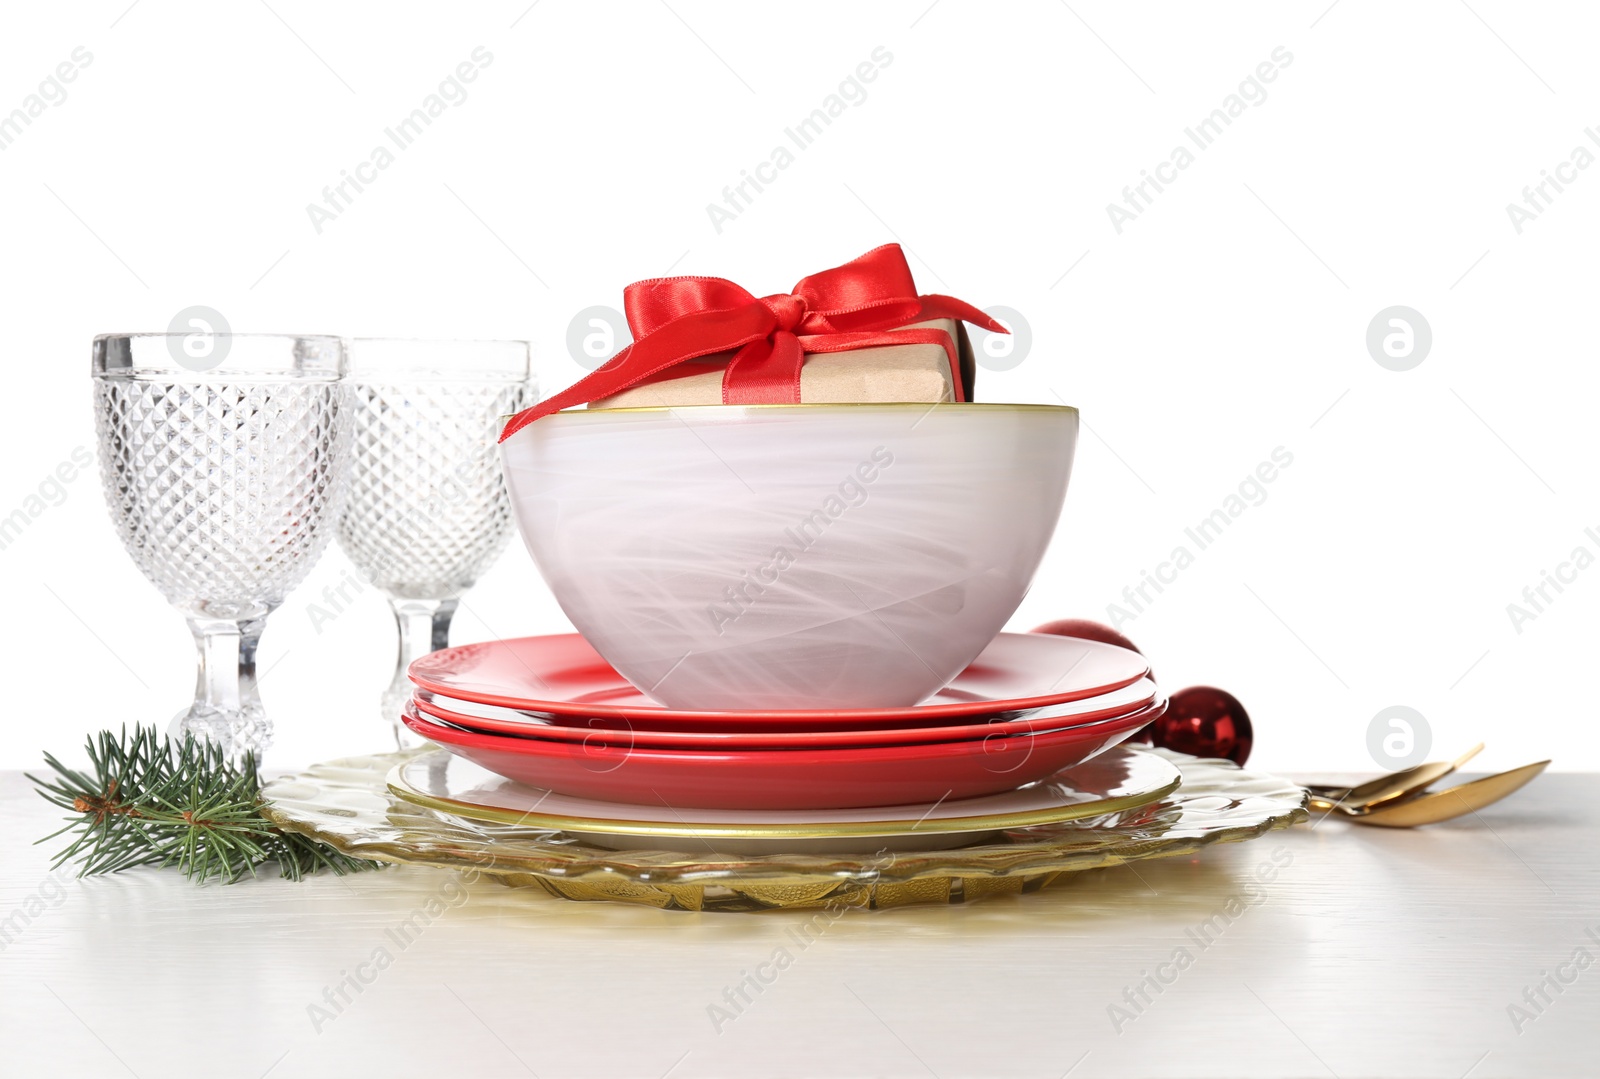 Photo of Festive dishware with gift, glasses and Christmas decorations on white table